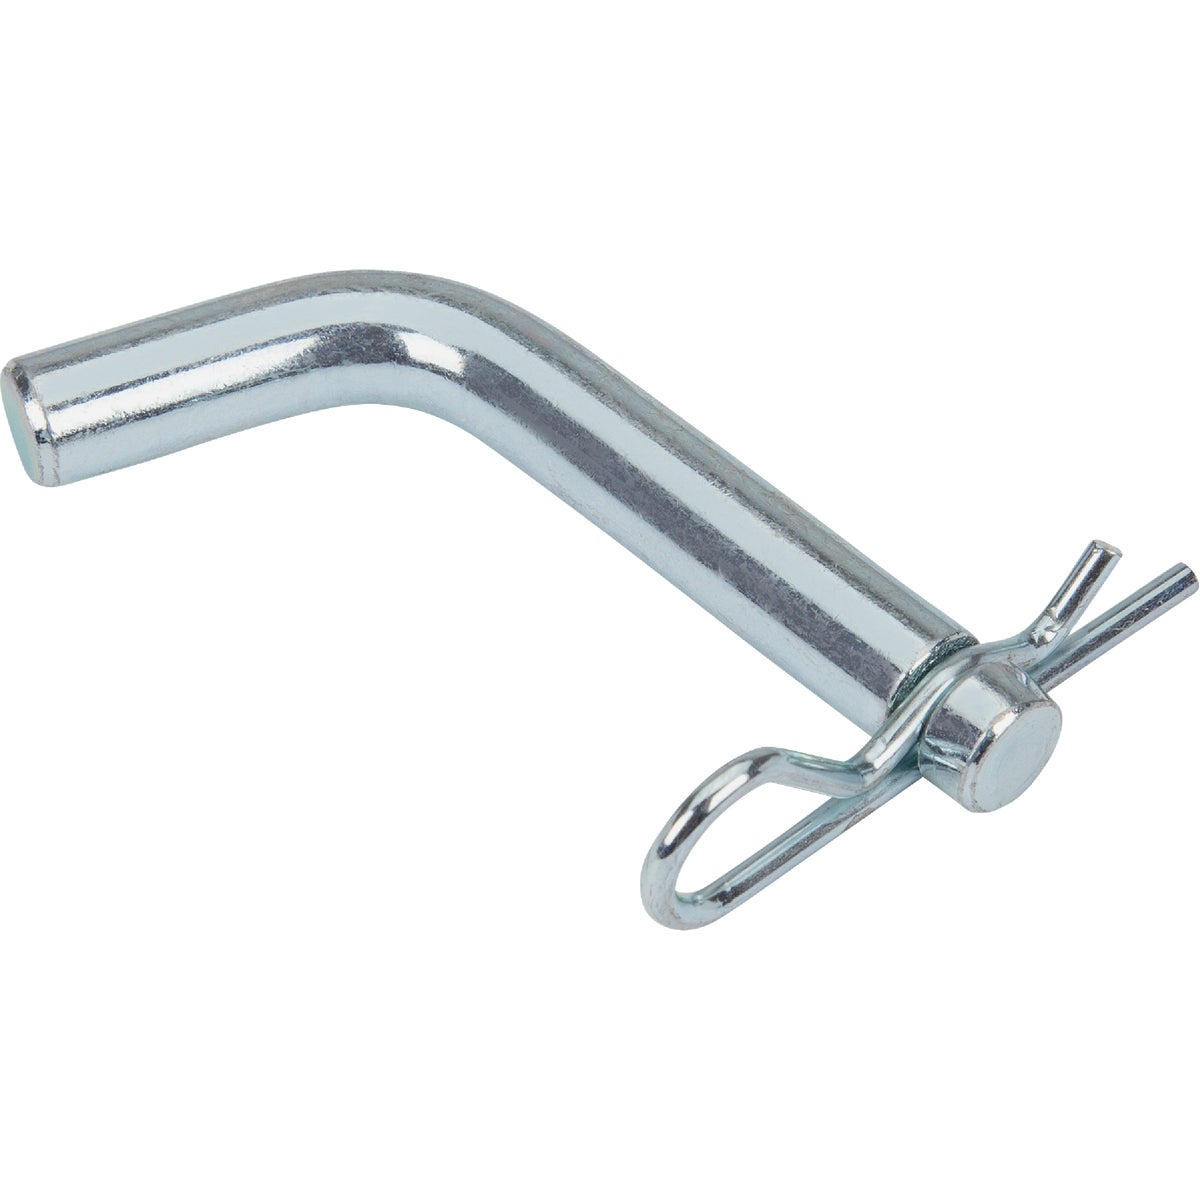 Item 585300, The Standard Steel Bent Hitch pin with Clip protects your boats, campers, 